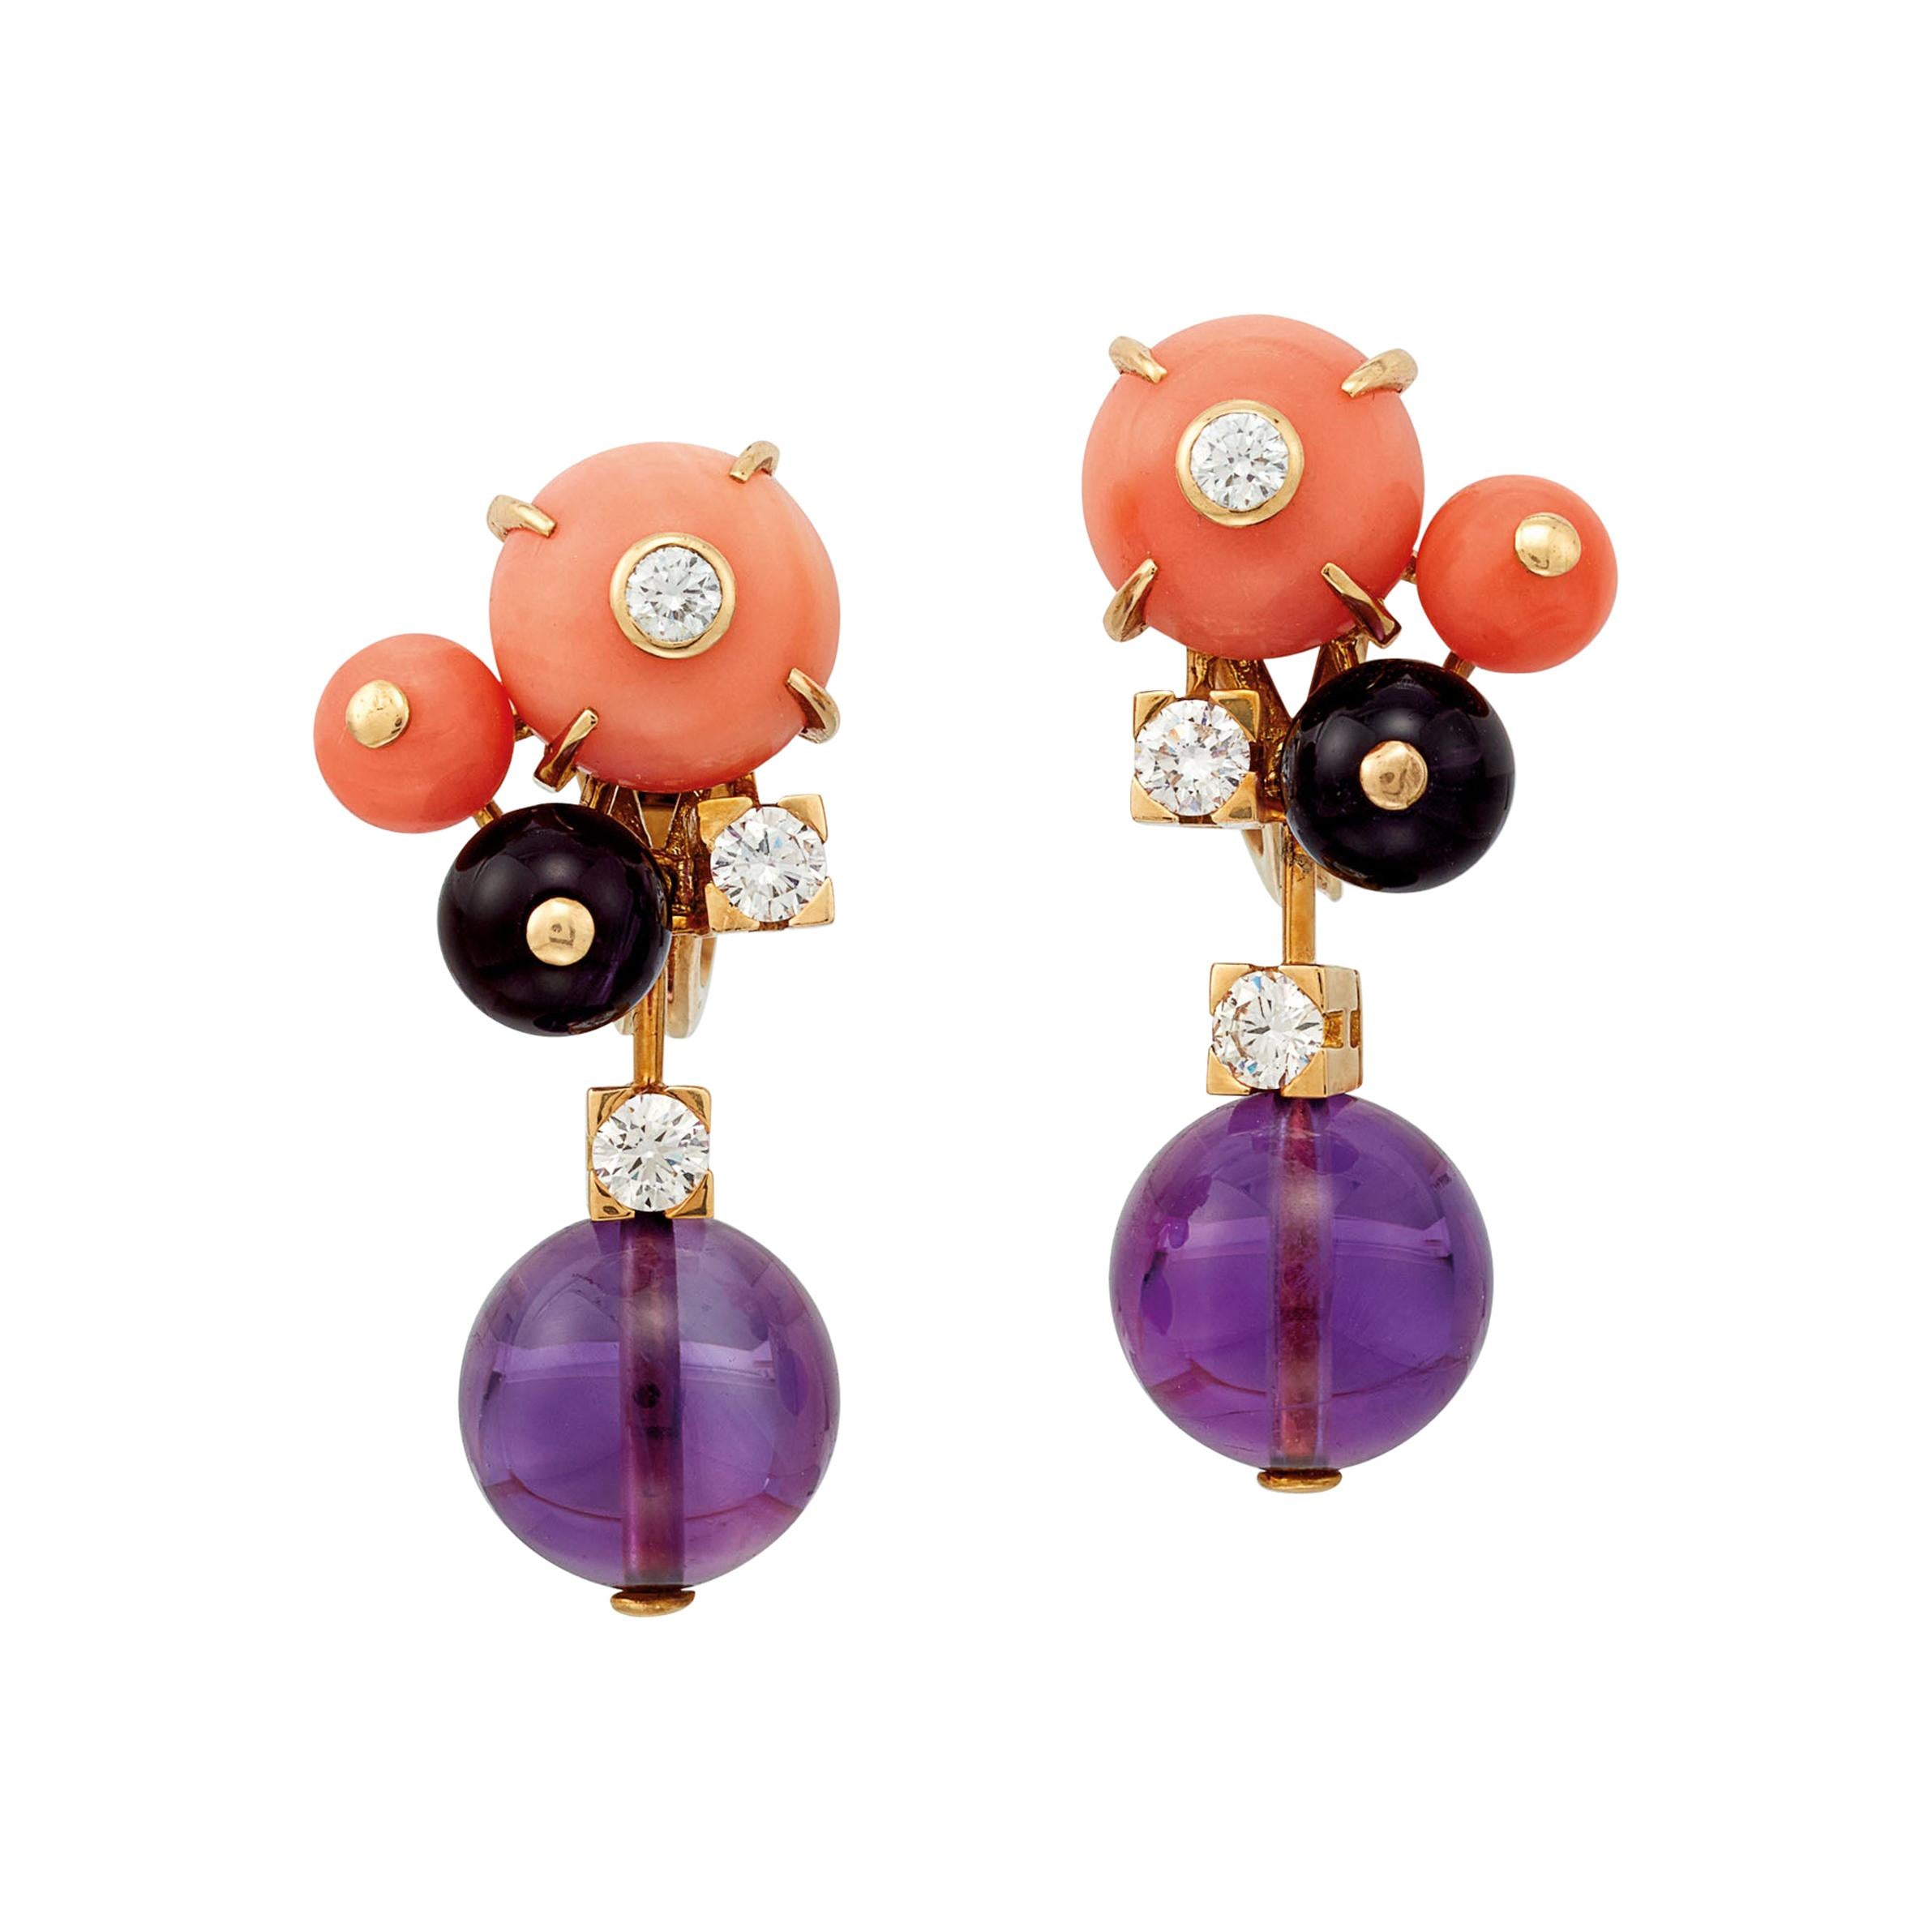 Cartier ‘Delice de Goa’ Earrings with Amethyst, Diamonds and Coral in 18K Gold